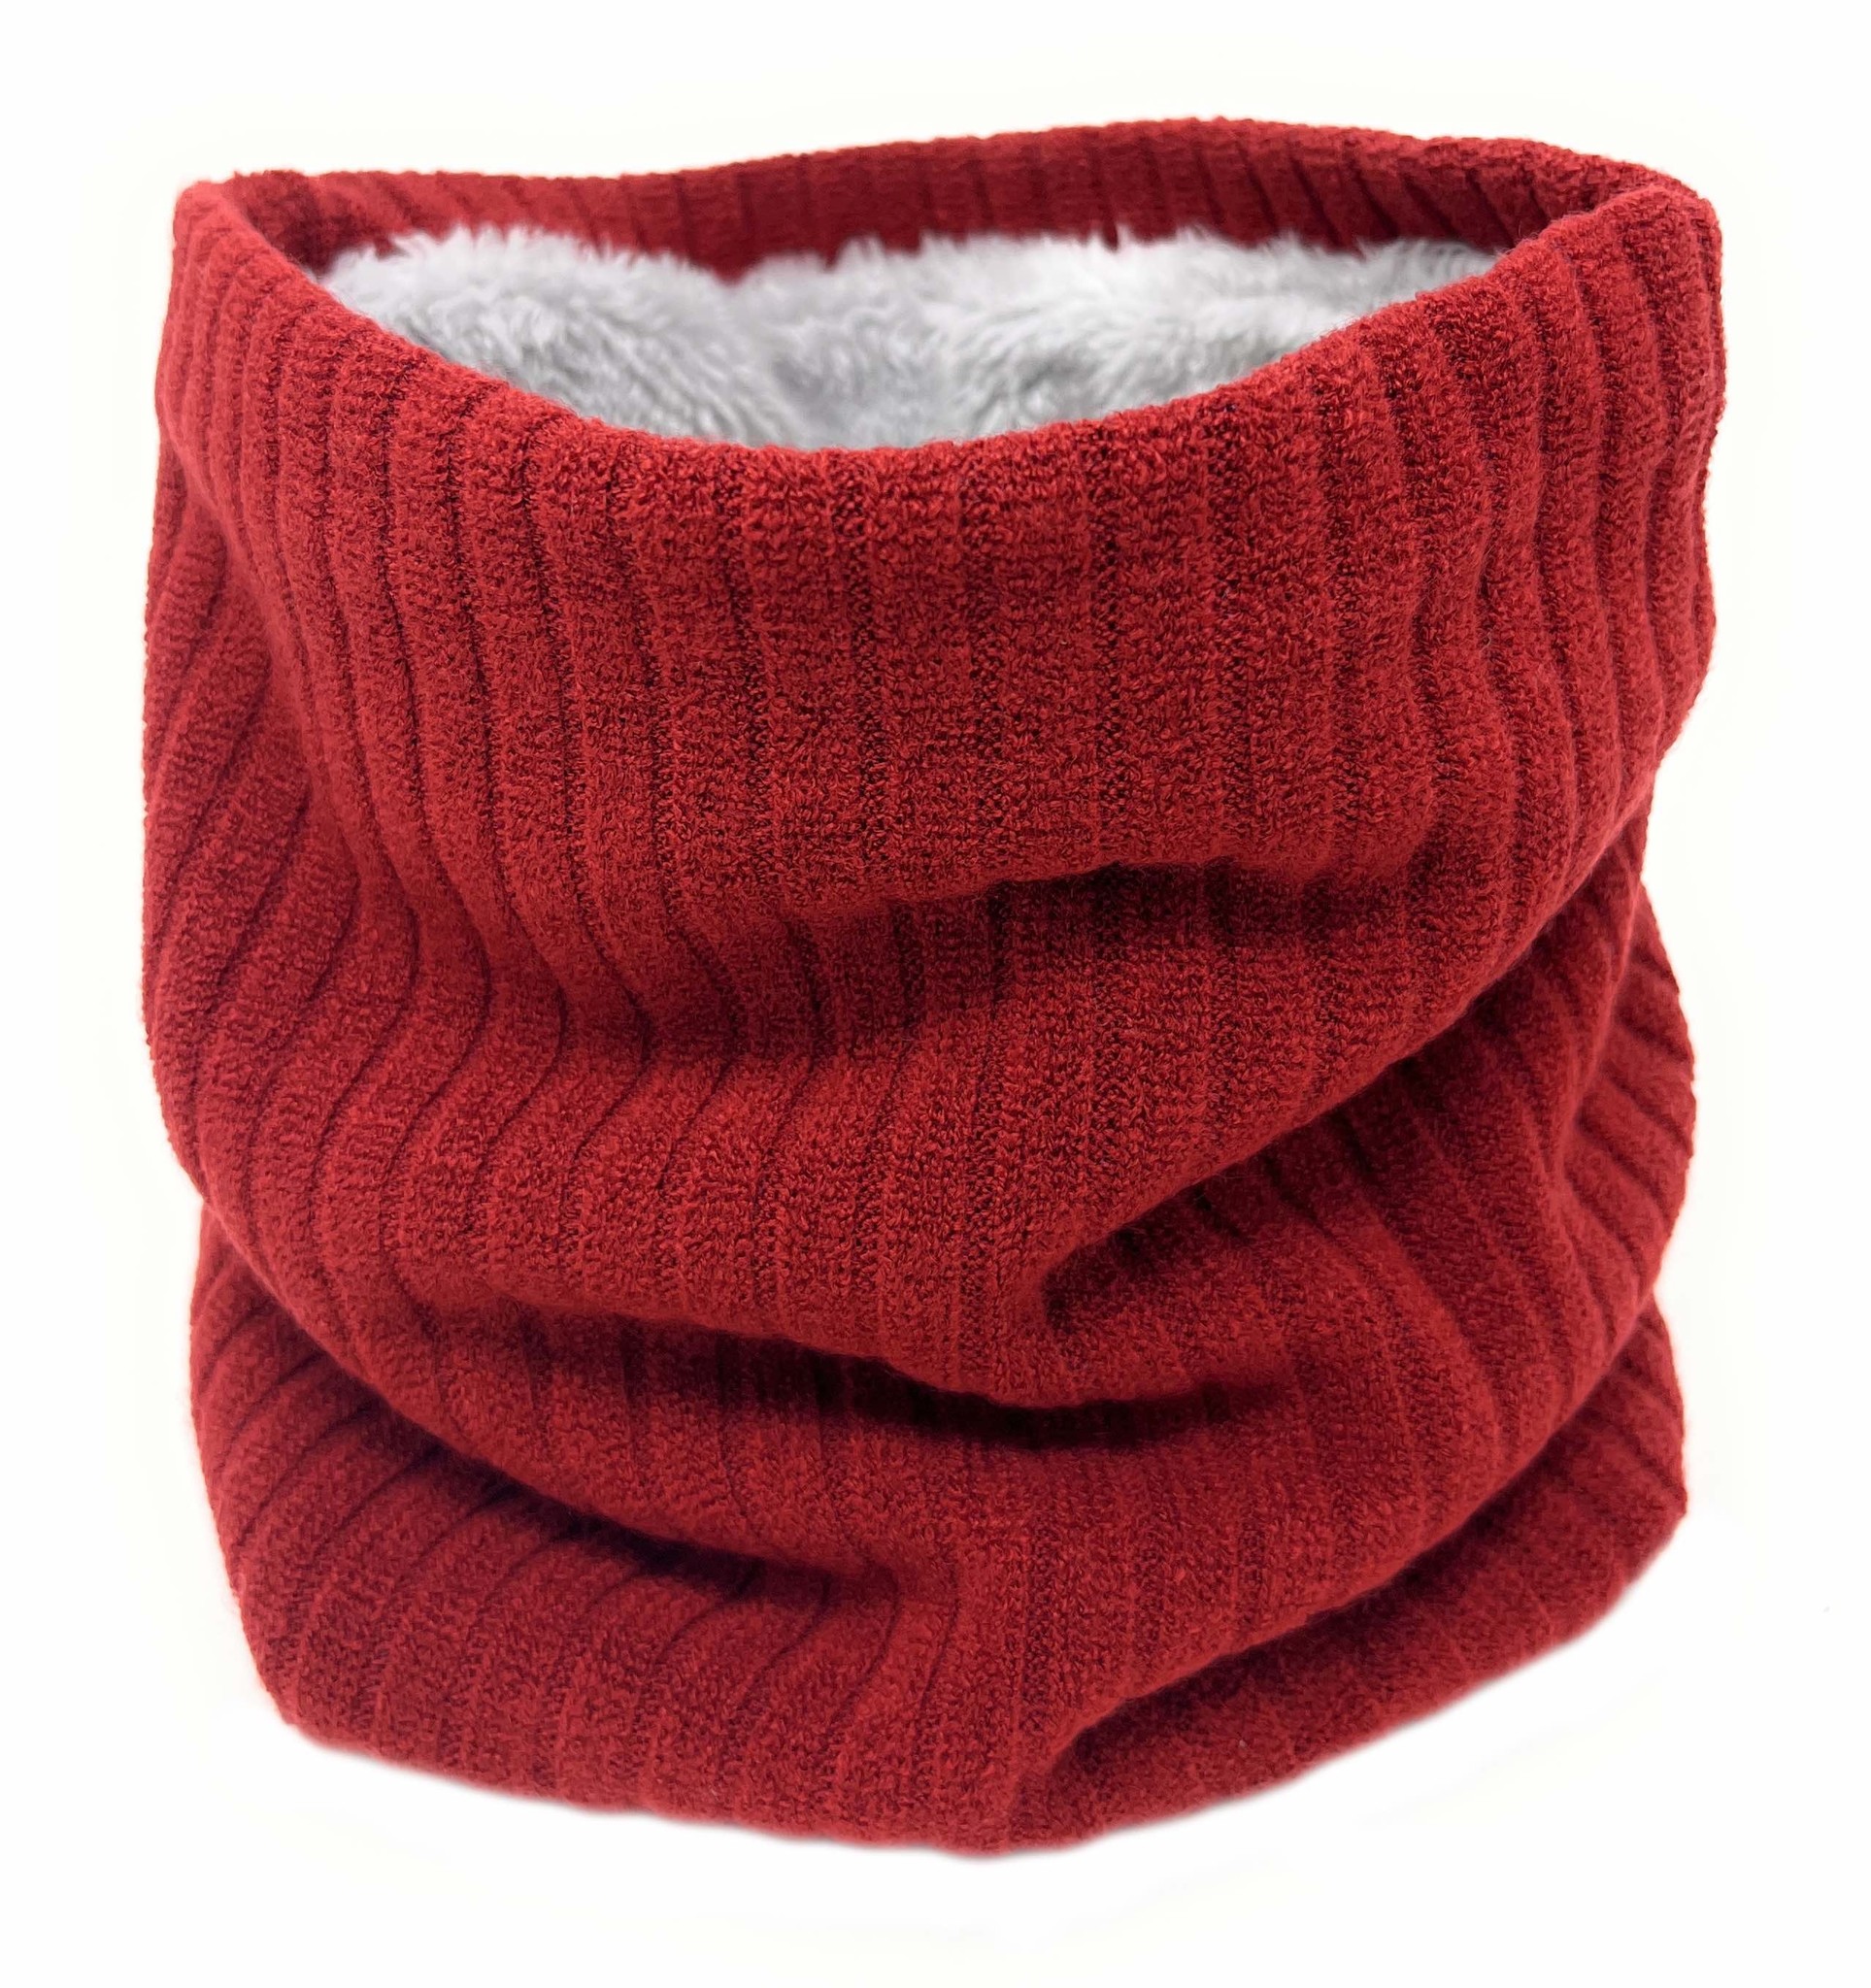 Neck Warmer, Men and Women, Sports Neck Gaiter, Head Scarf, Soft Stretchy - Red-1